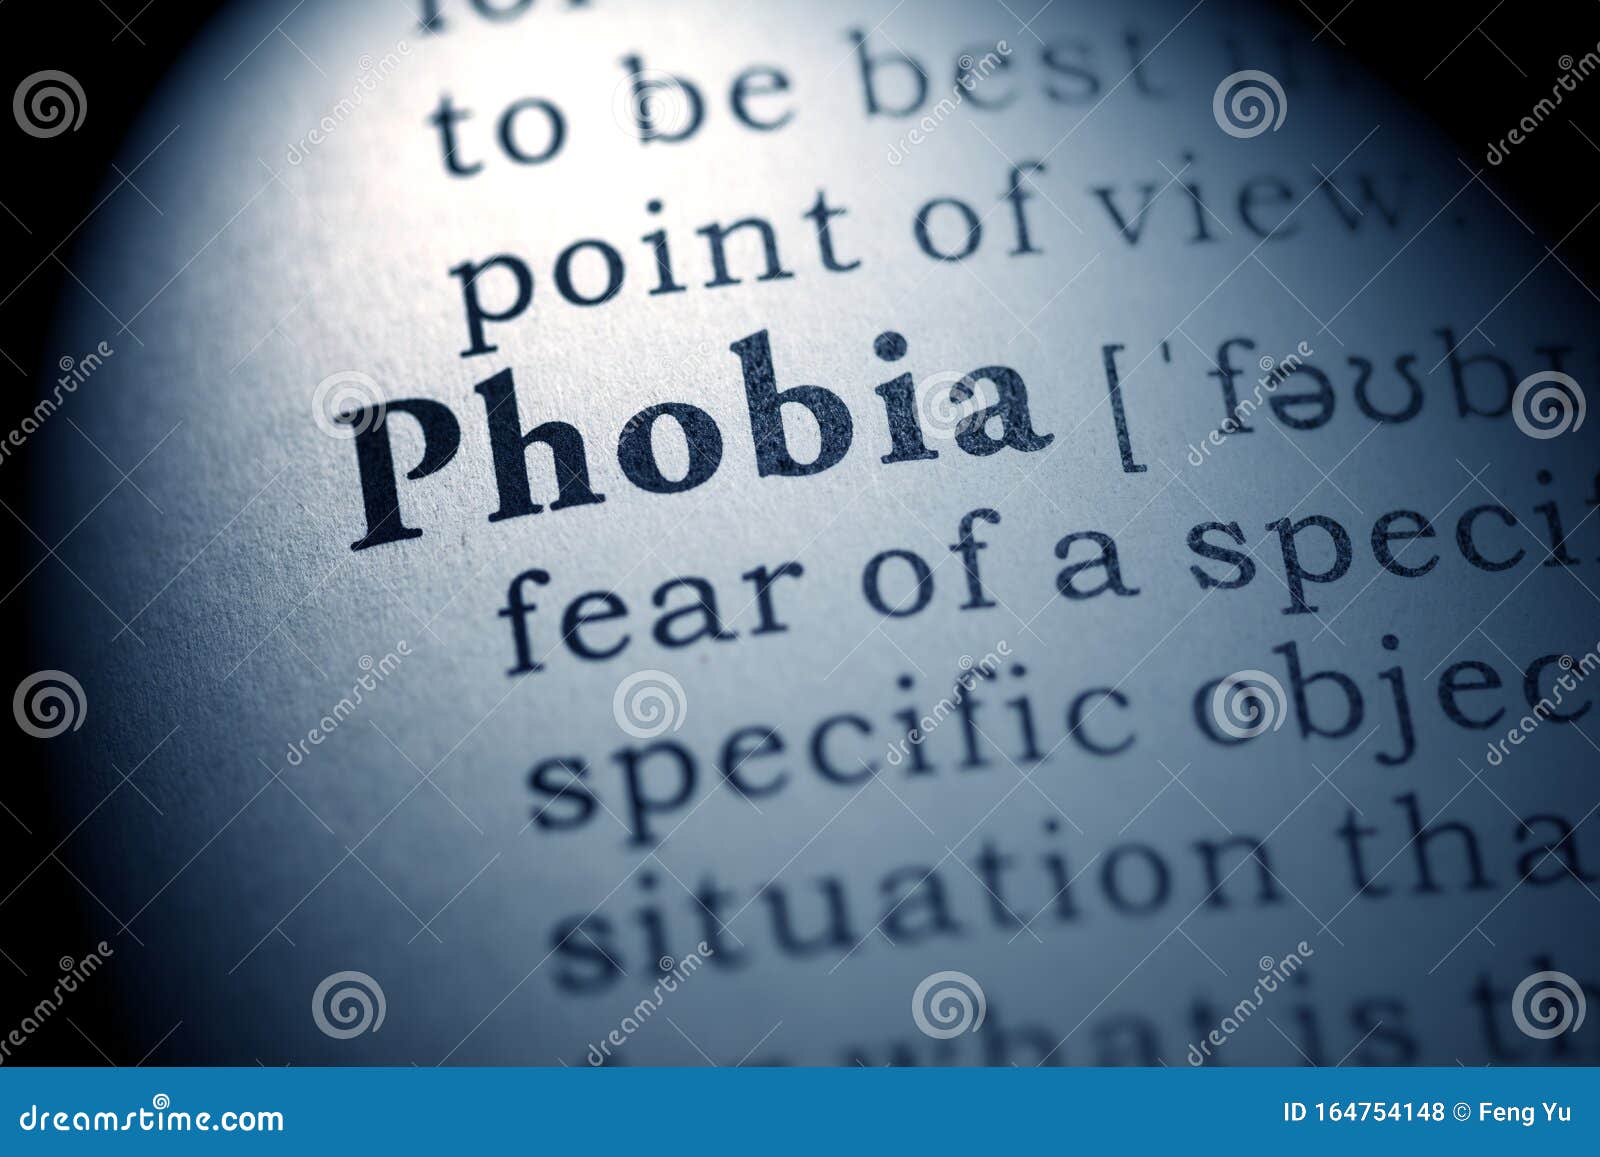 definition of the word phobia